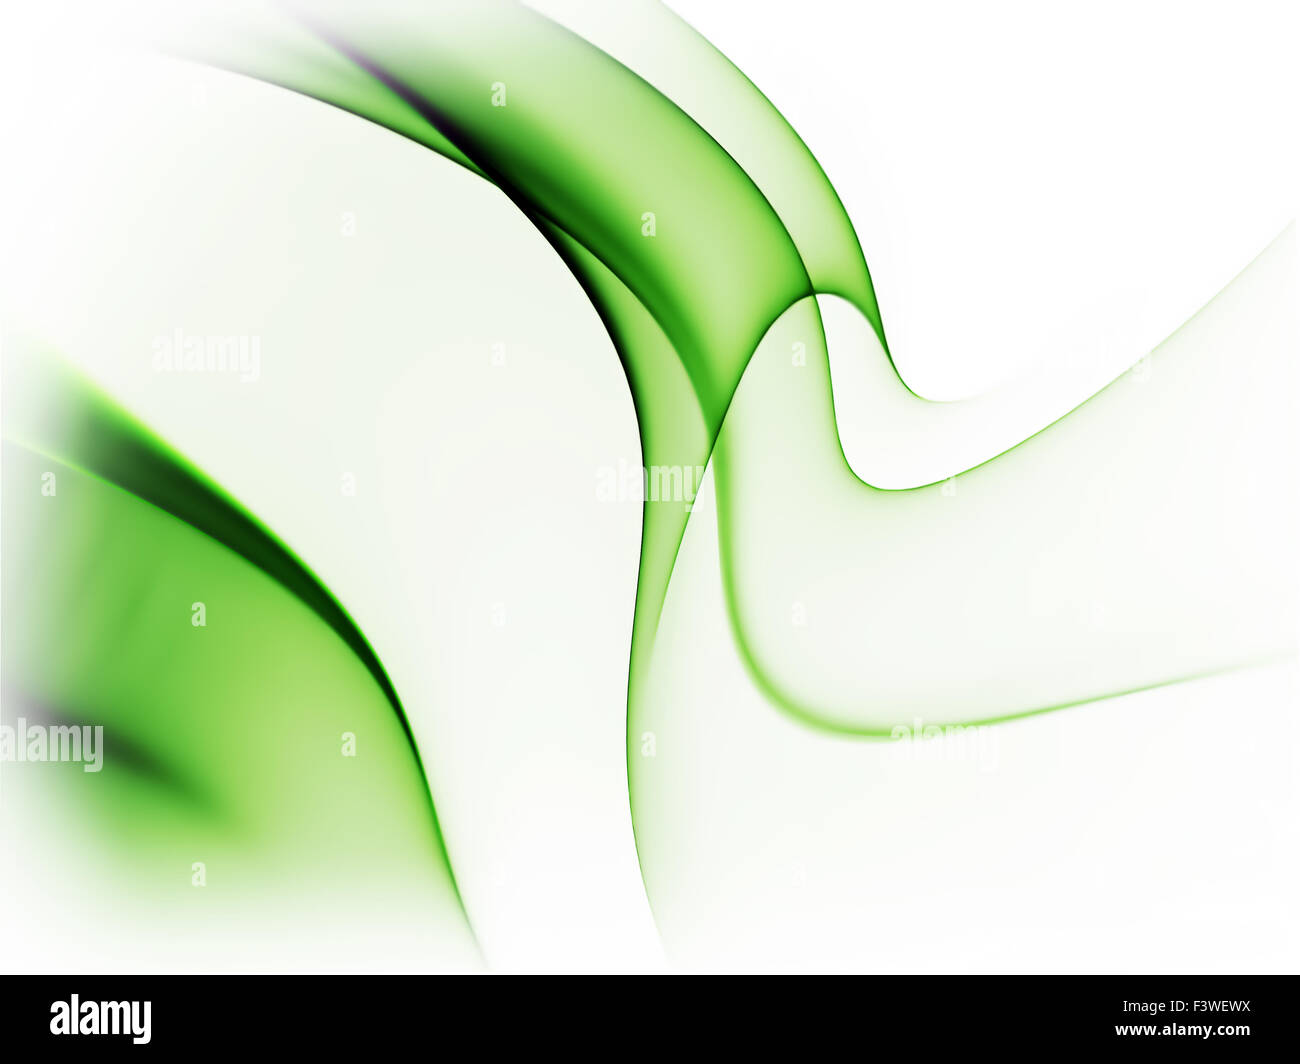 dynamic green abstract background on white Stock Photo